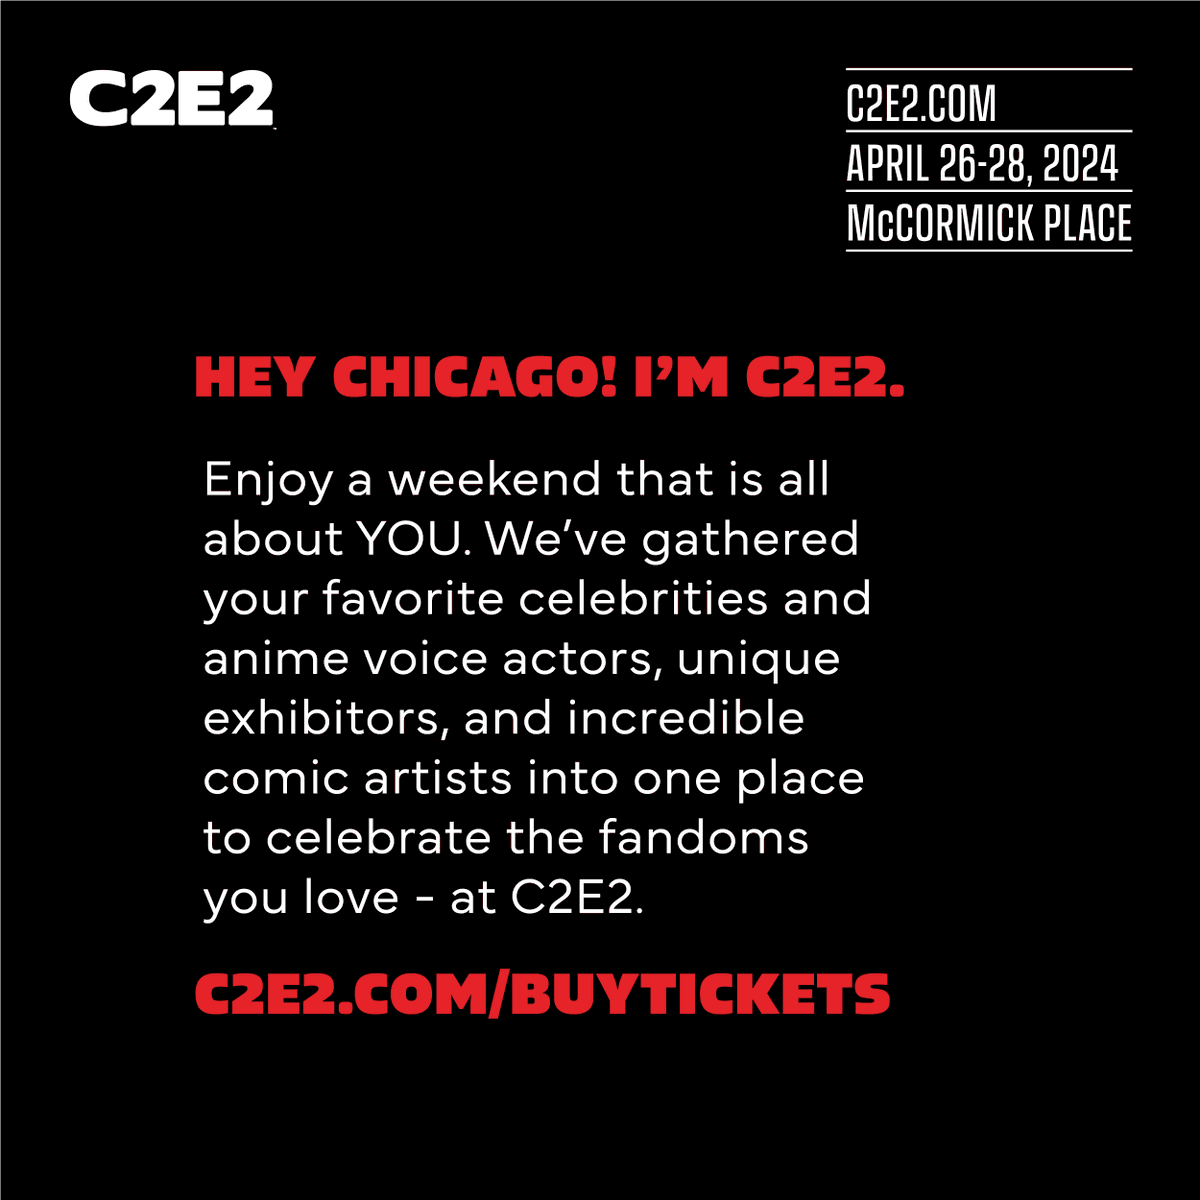 Celebrate the 15th edition of C2E2 – Chicago’s Comic & Entertainment Expo April 26-28 at McCormick Place. Meet your fav celebs from Stranger Things, Dune 2, Scream, Hannibal, One Tree Hill, Back to the Future, Kingdom Hearts, & much more! Buy tickets: C2E224.com/BuyTickets